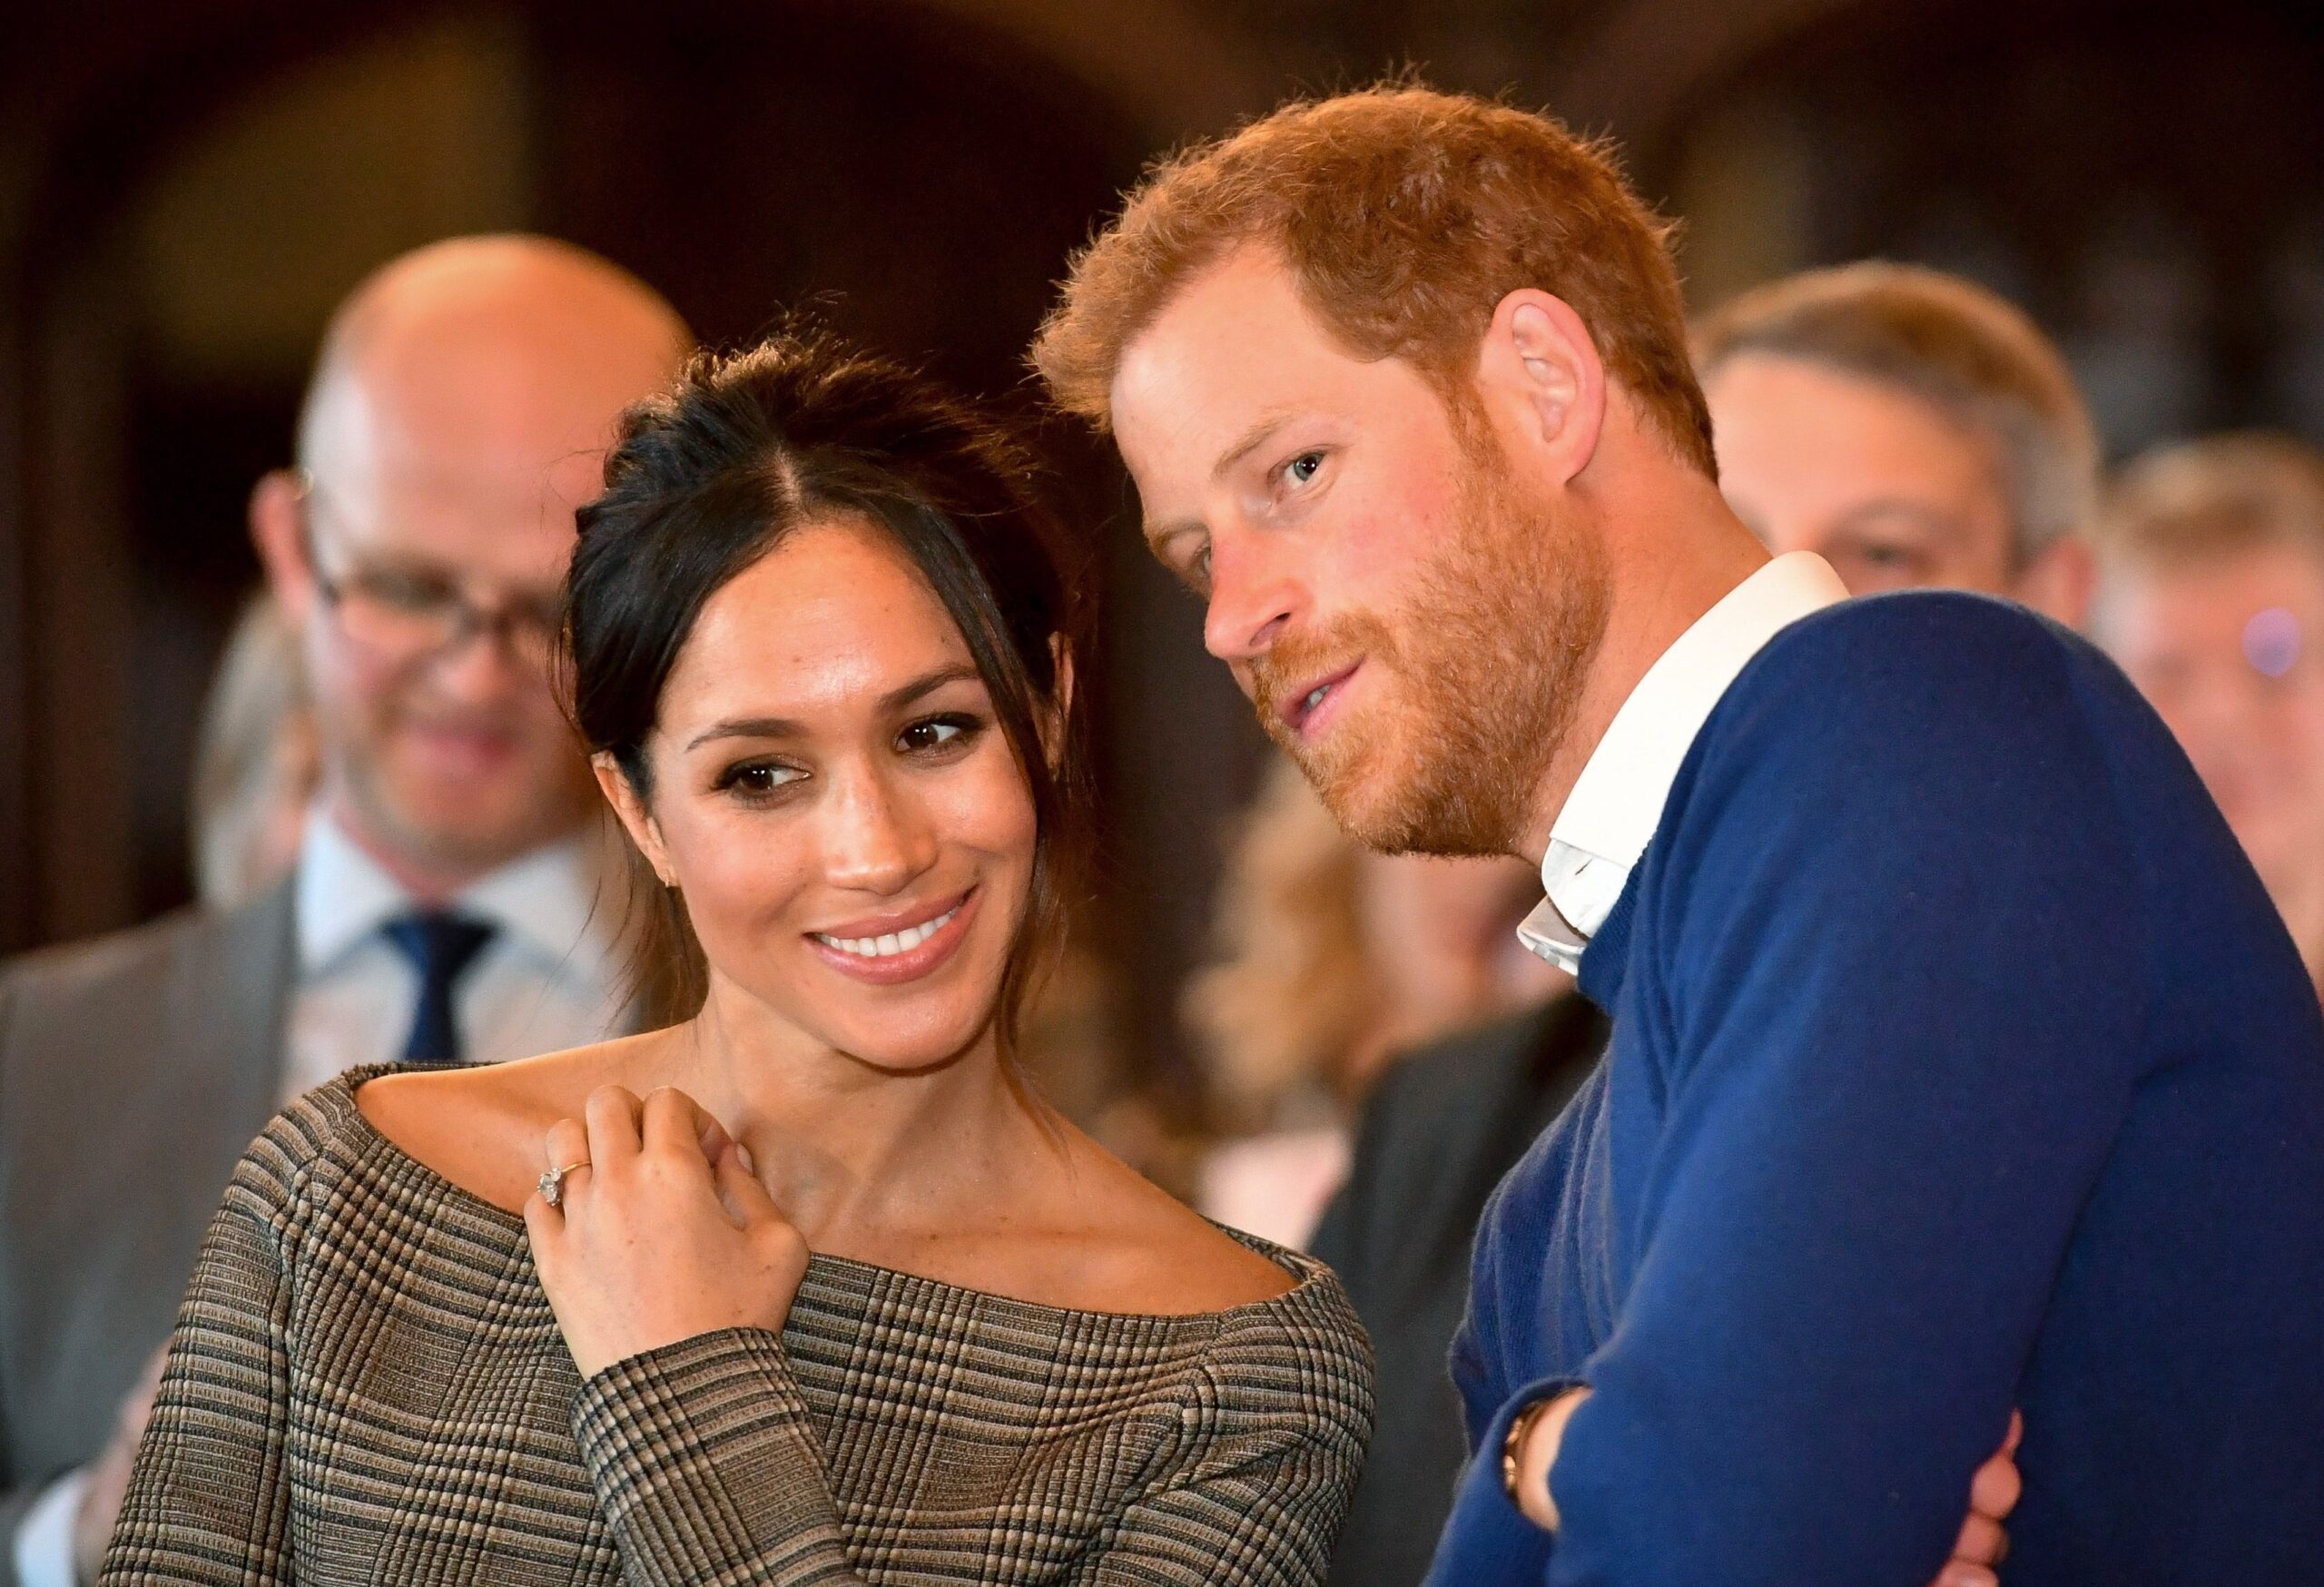 Meghan Markle and Prince Harry’s Reaction to Spotify Deal Backlash